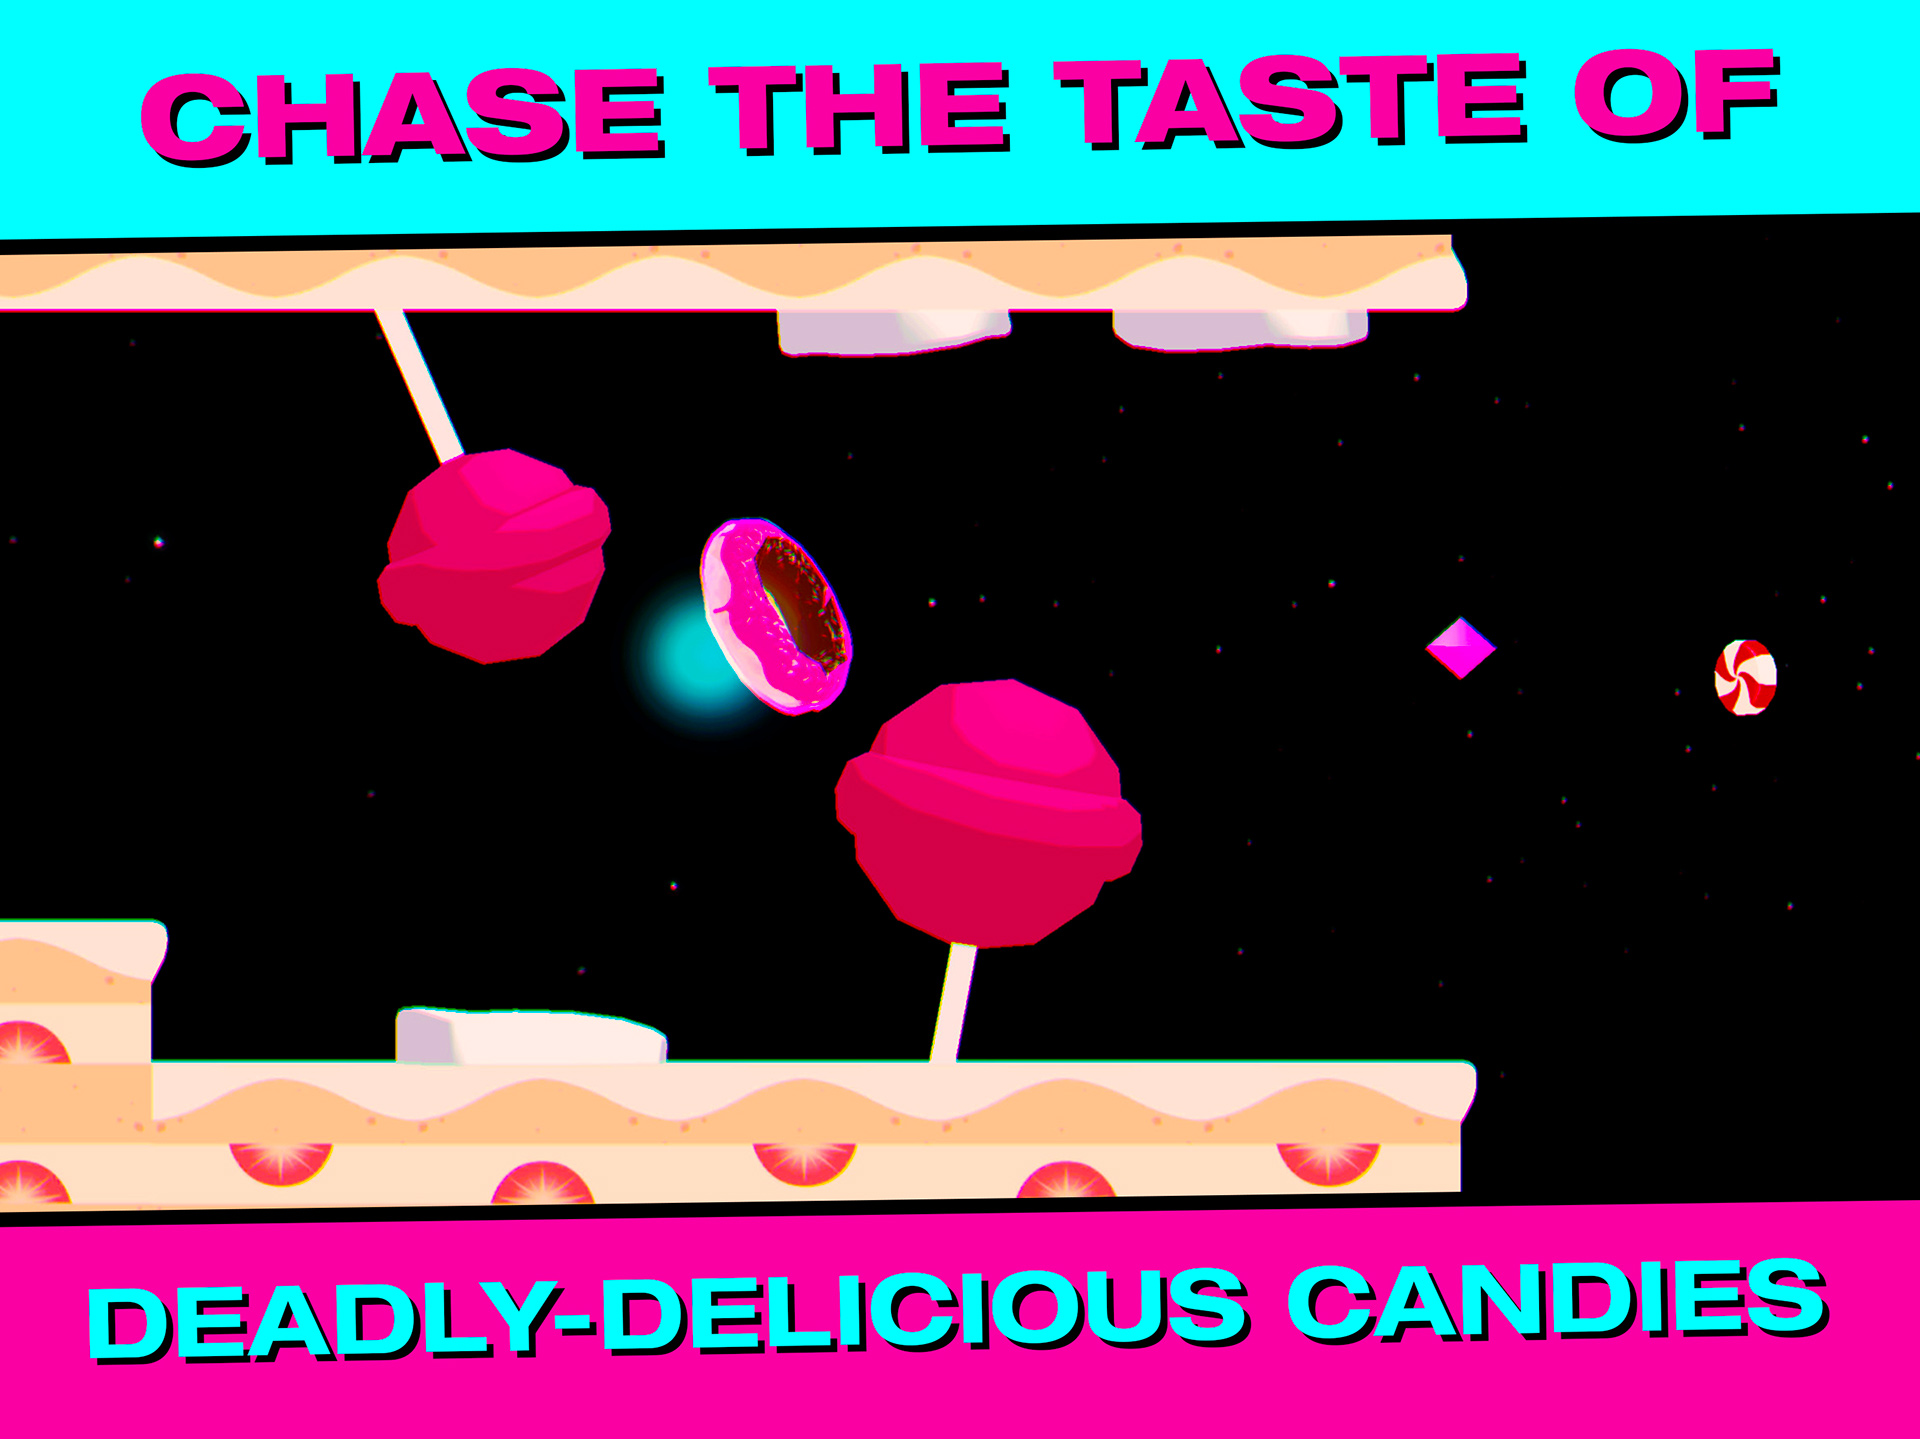 CHASE THE TASTE OF DEADLY-DELICIOUS CANDIES